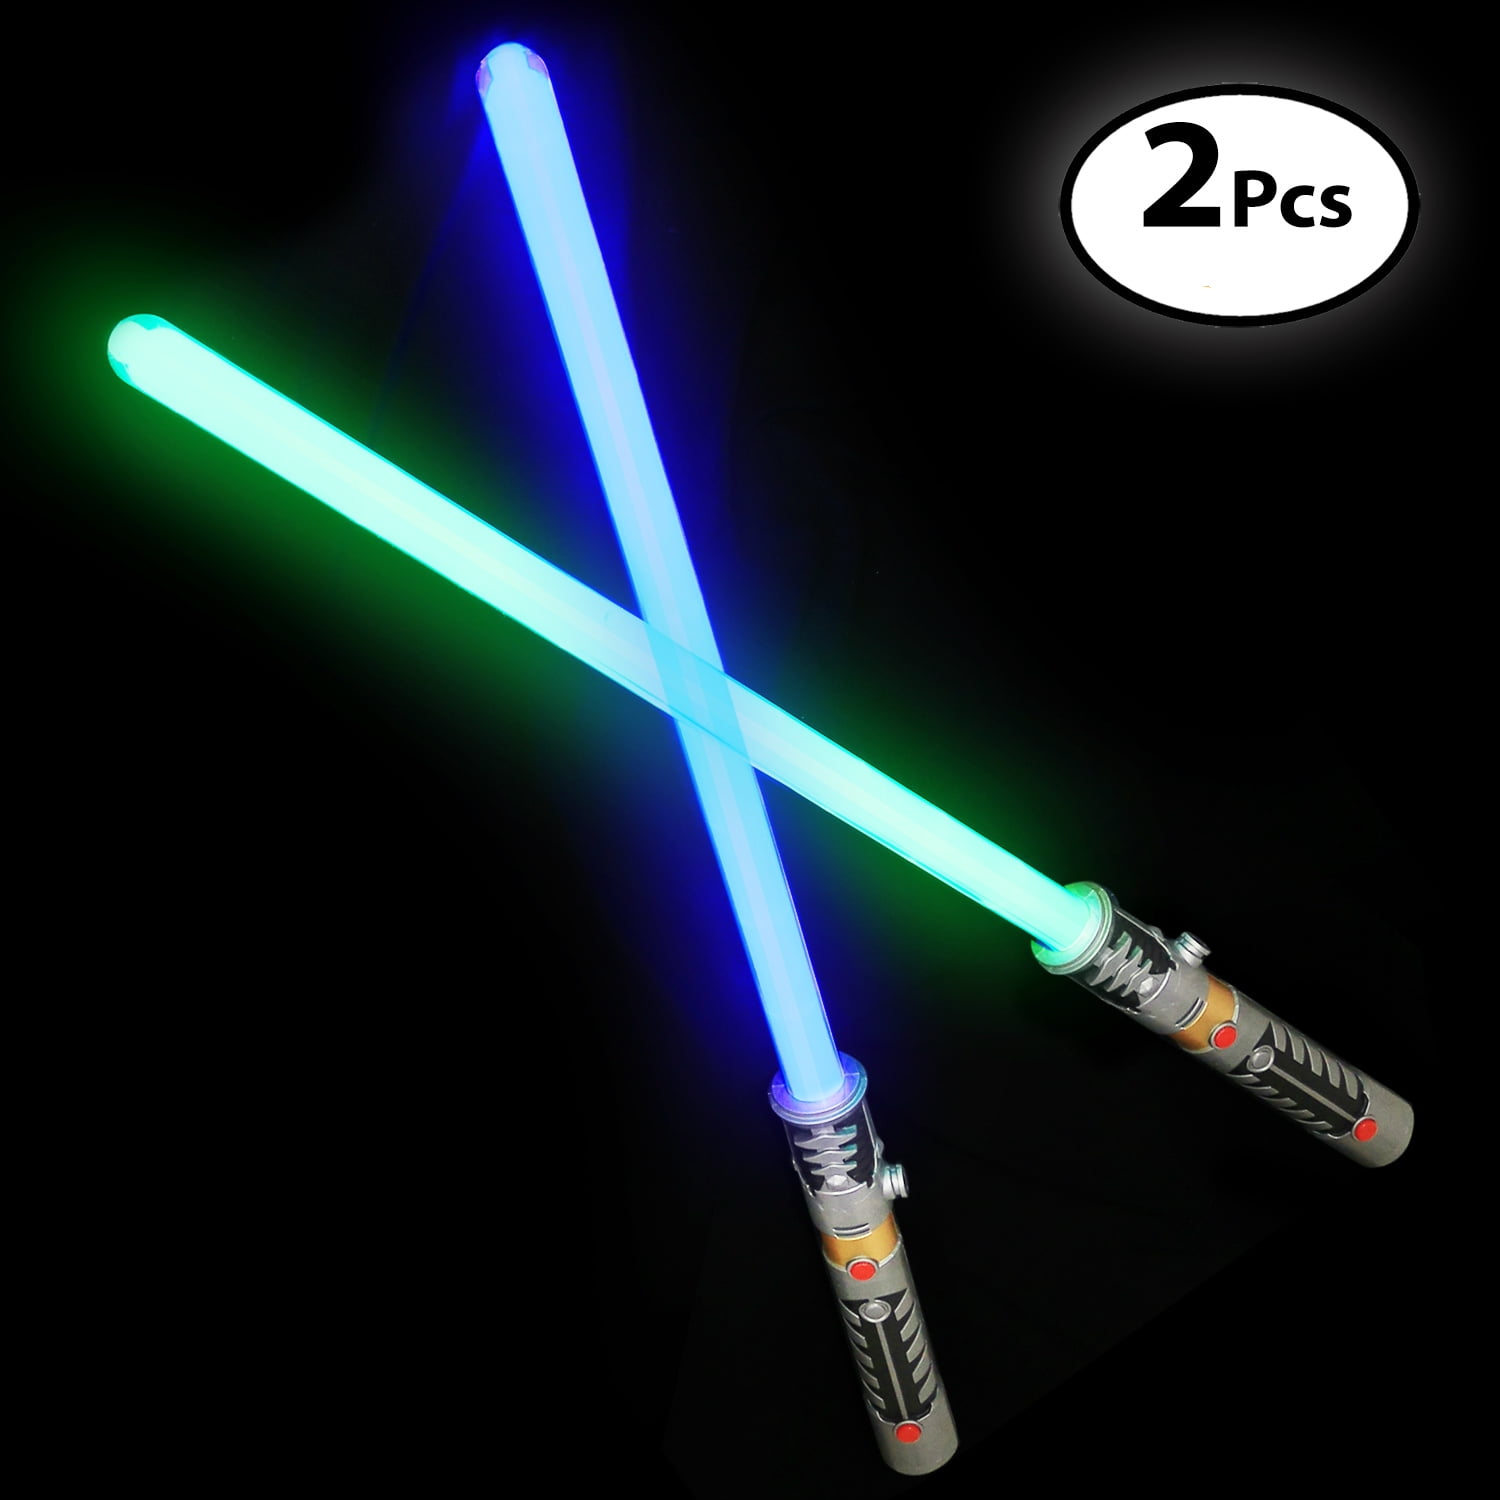 2pcs/lot NEW Colorful 76cm Star Wars Foldable Laser Sword with Sound and Light 